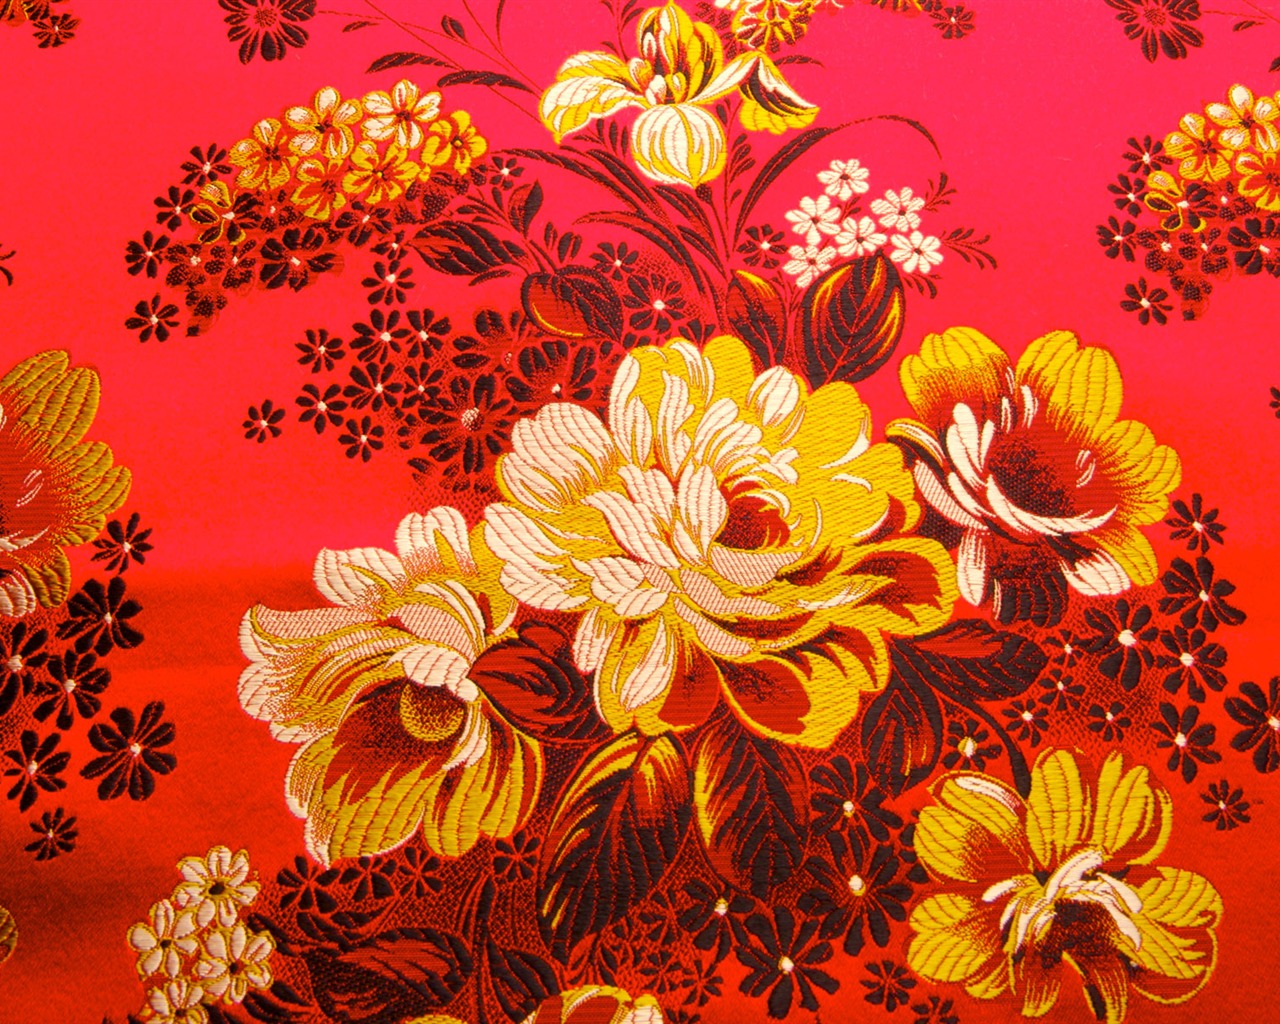 China Wind exquisite embroidery Wallpaper #9 - 1280x1024